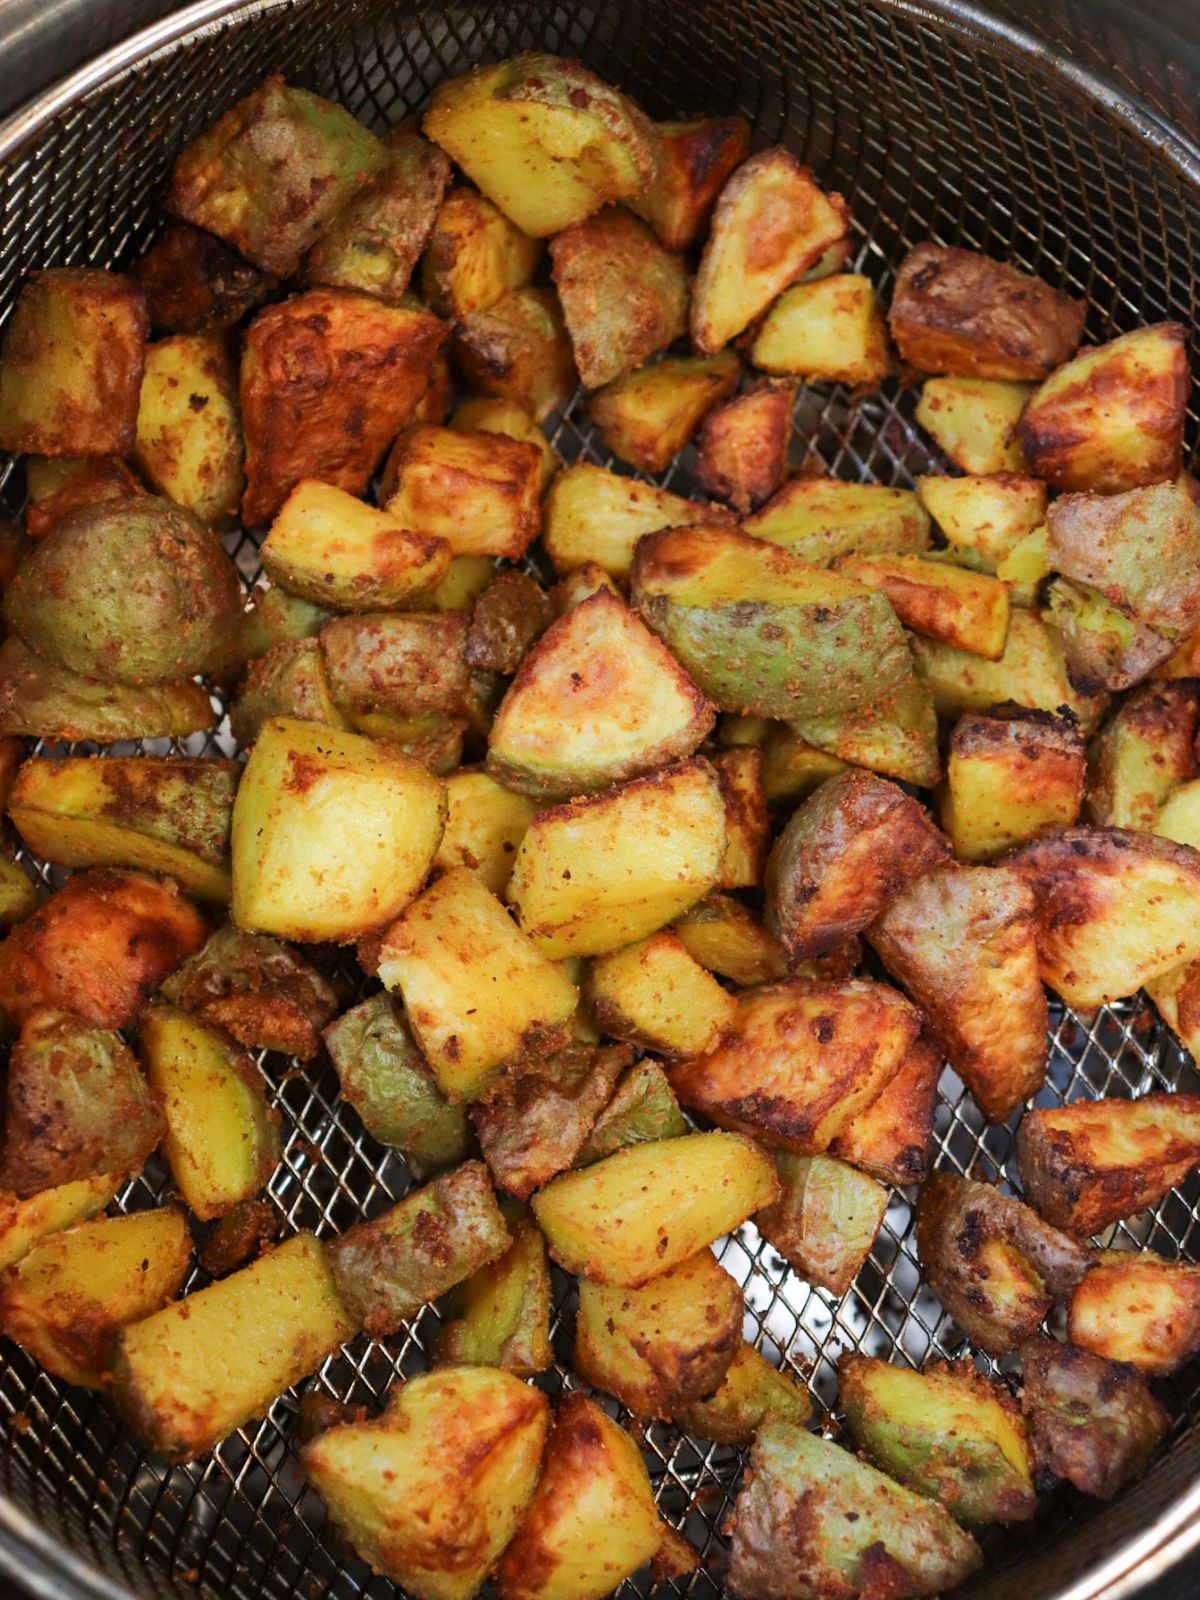 Air fried diced potatoes in an air fryer basket after being air fried.